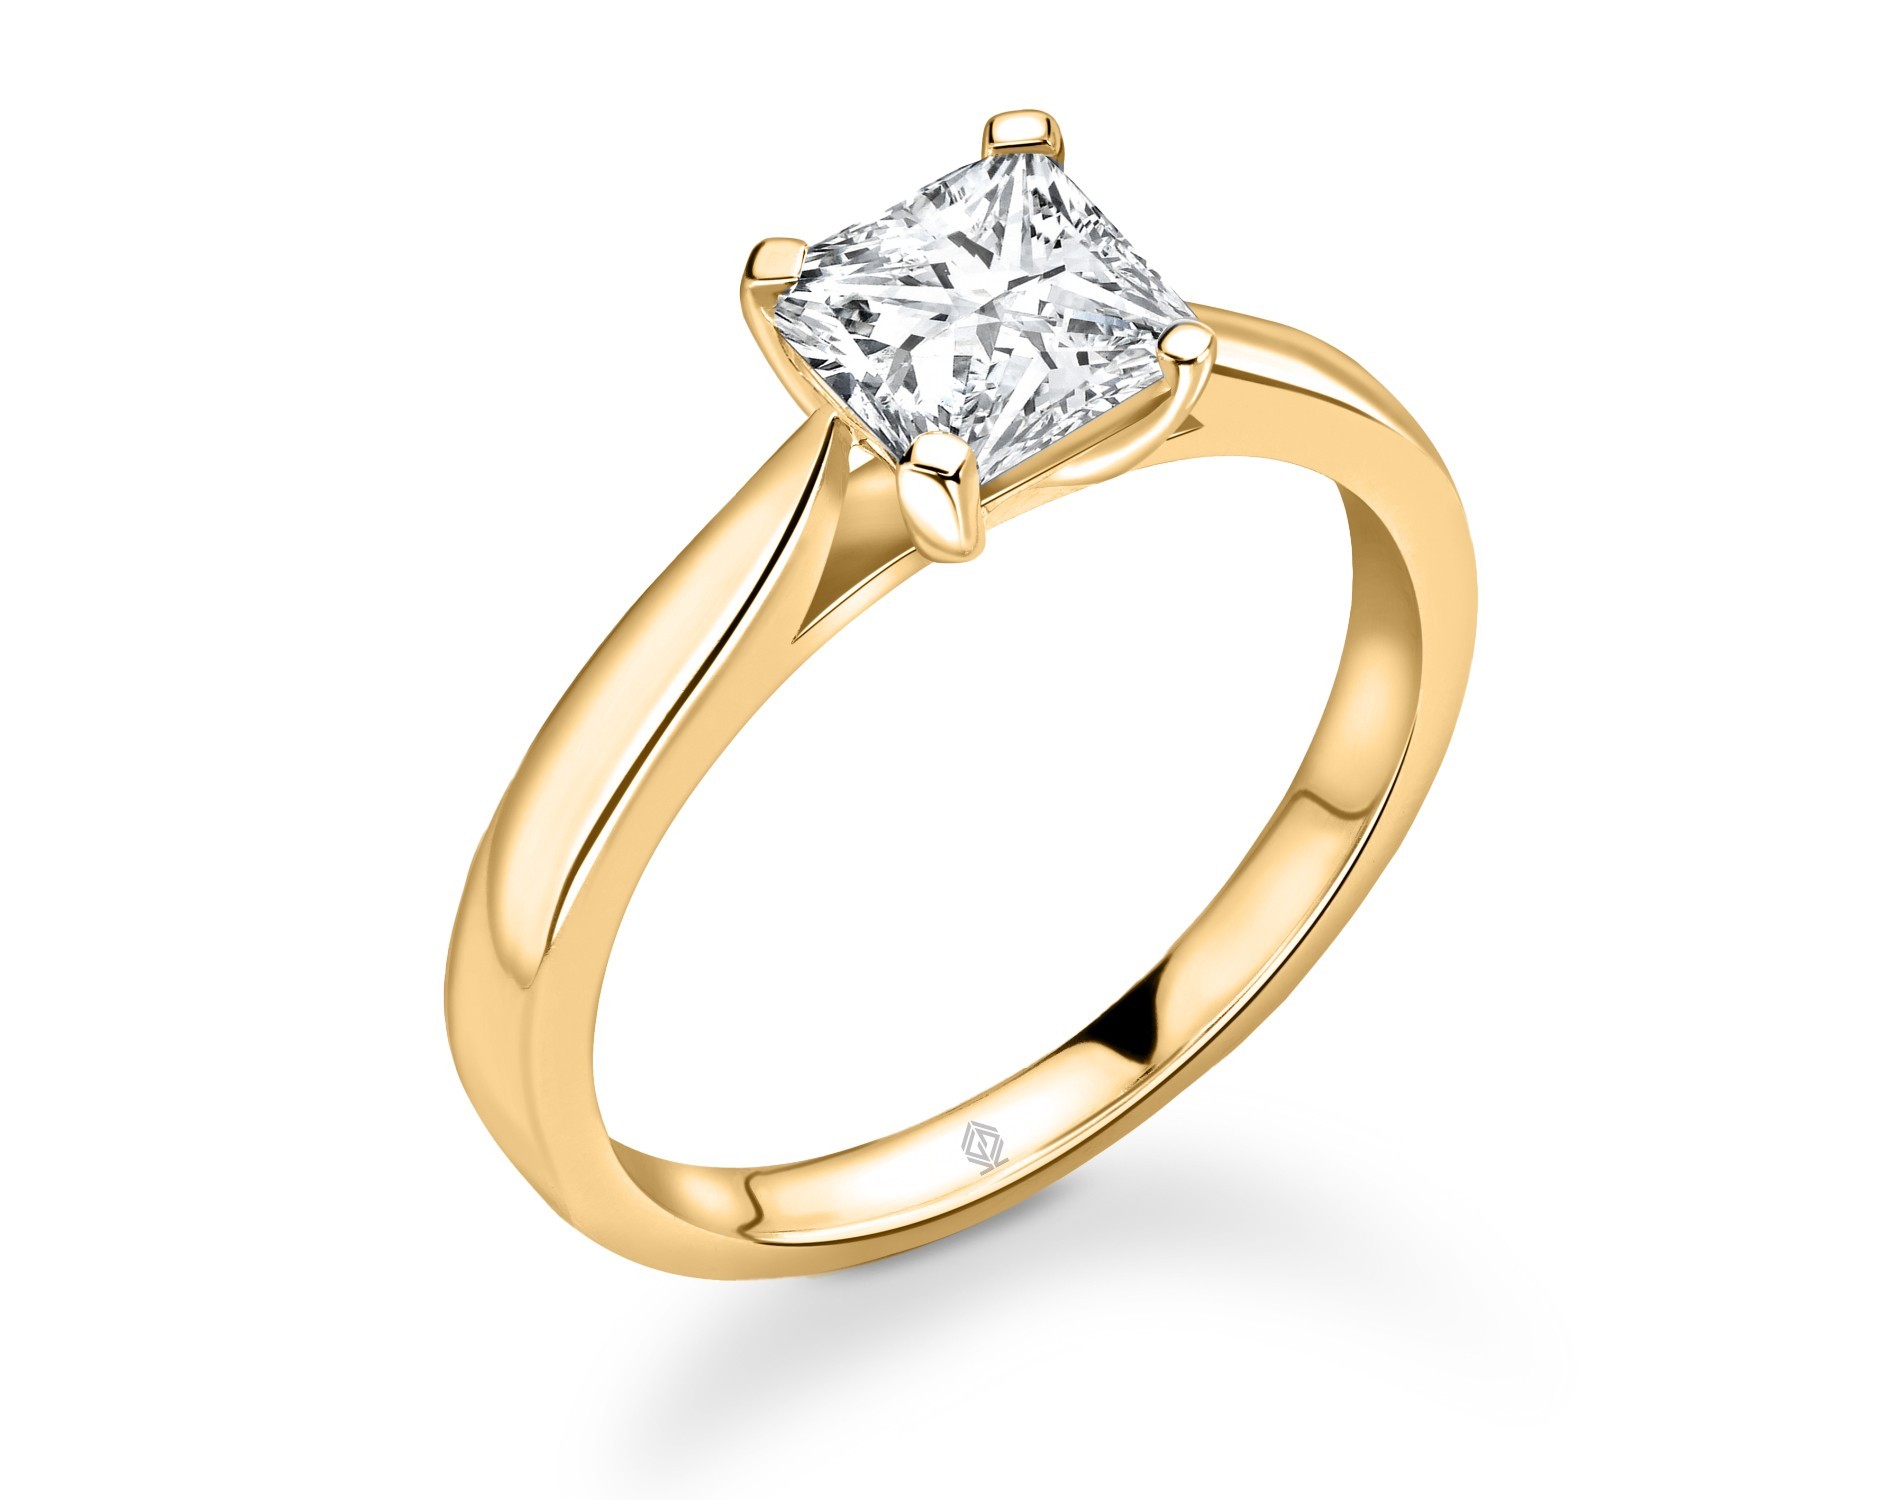 18K YELLOW GOLD 4 PRONGS SOLITAIRE CUSHION CUT DIAMOND ENGAGEMENT RING